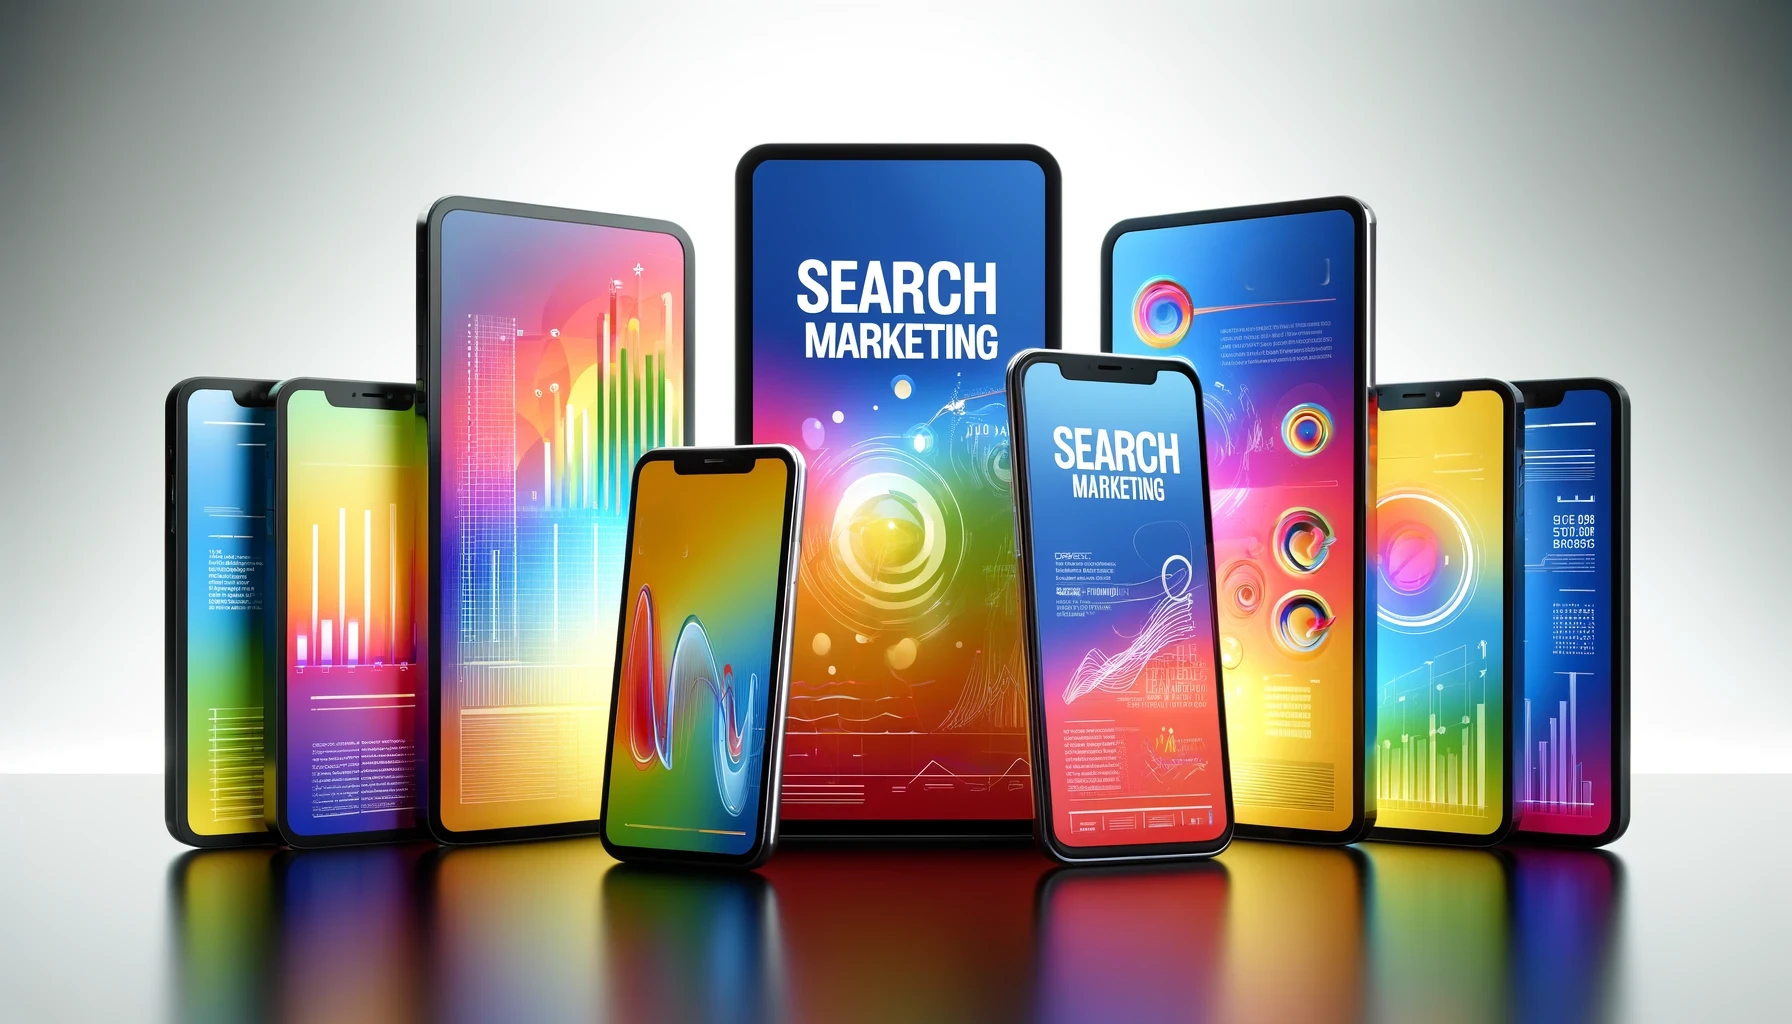 Mock up smart phones with the words "Search Marketing"